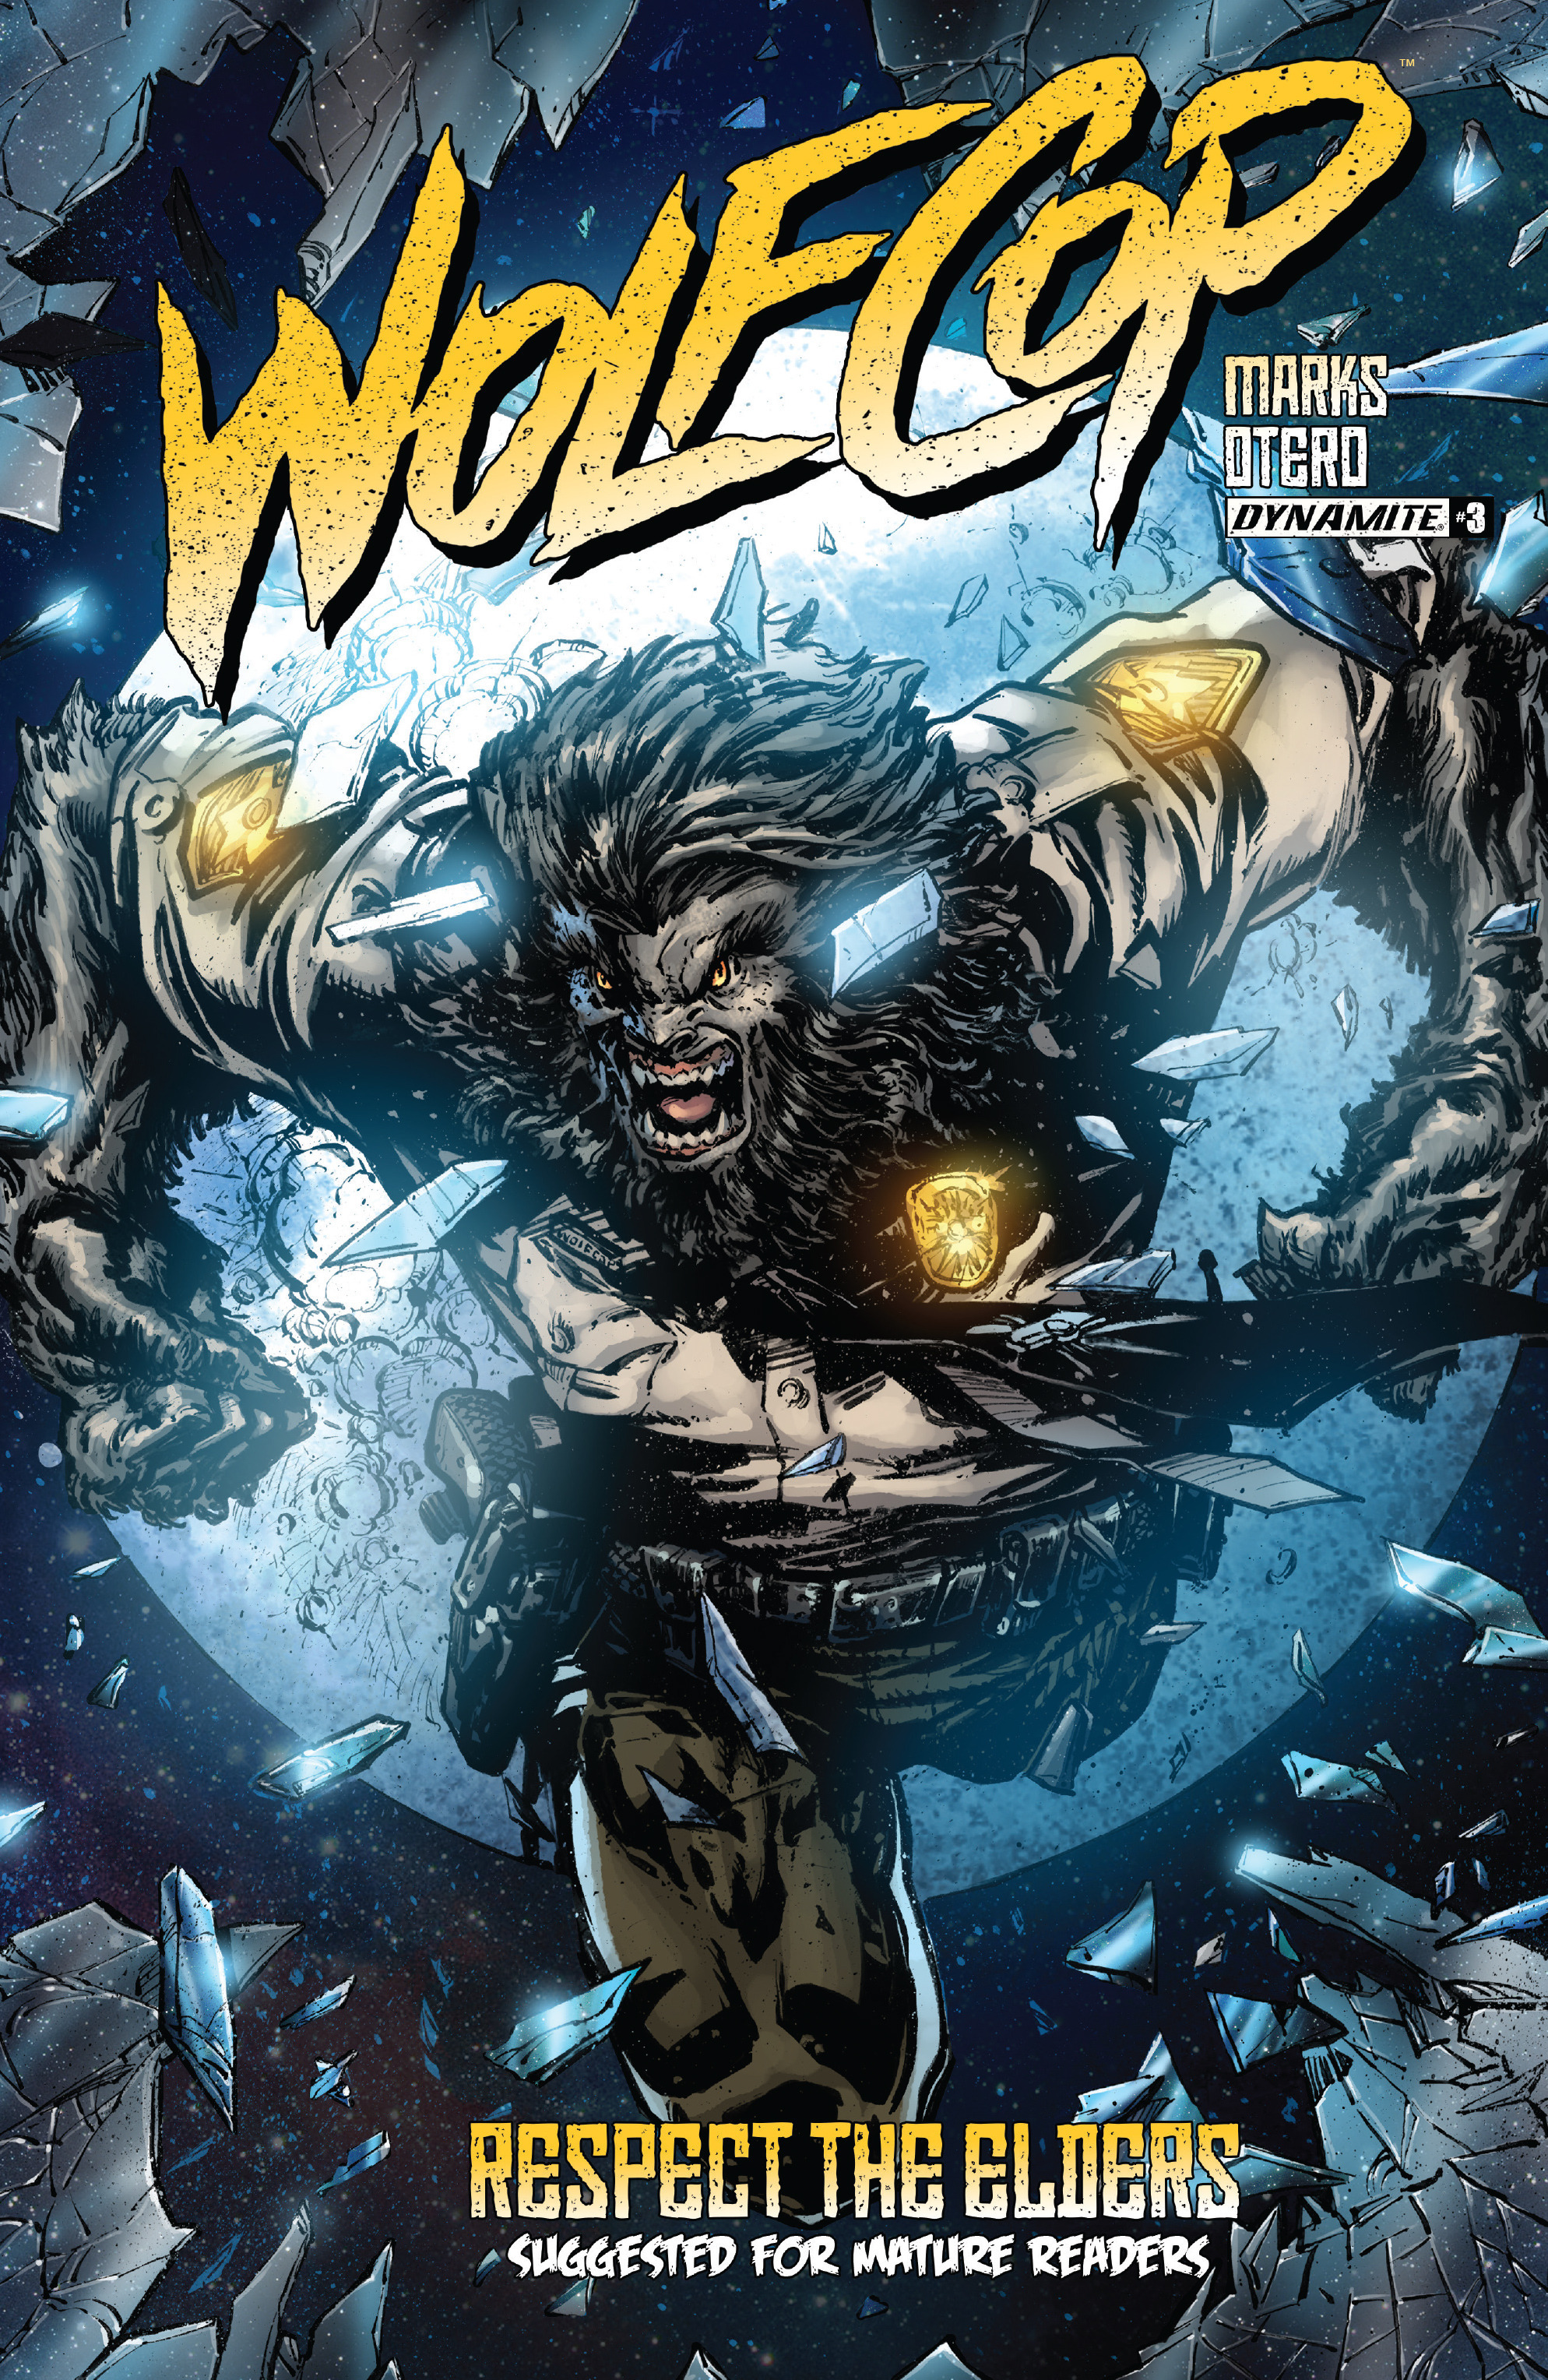 Read online Wolfcop comic -  Issue #3 - 1